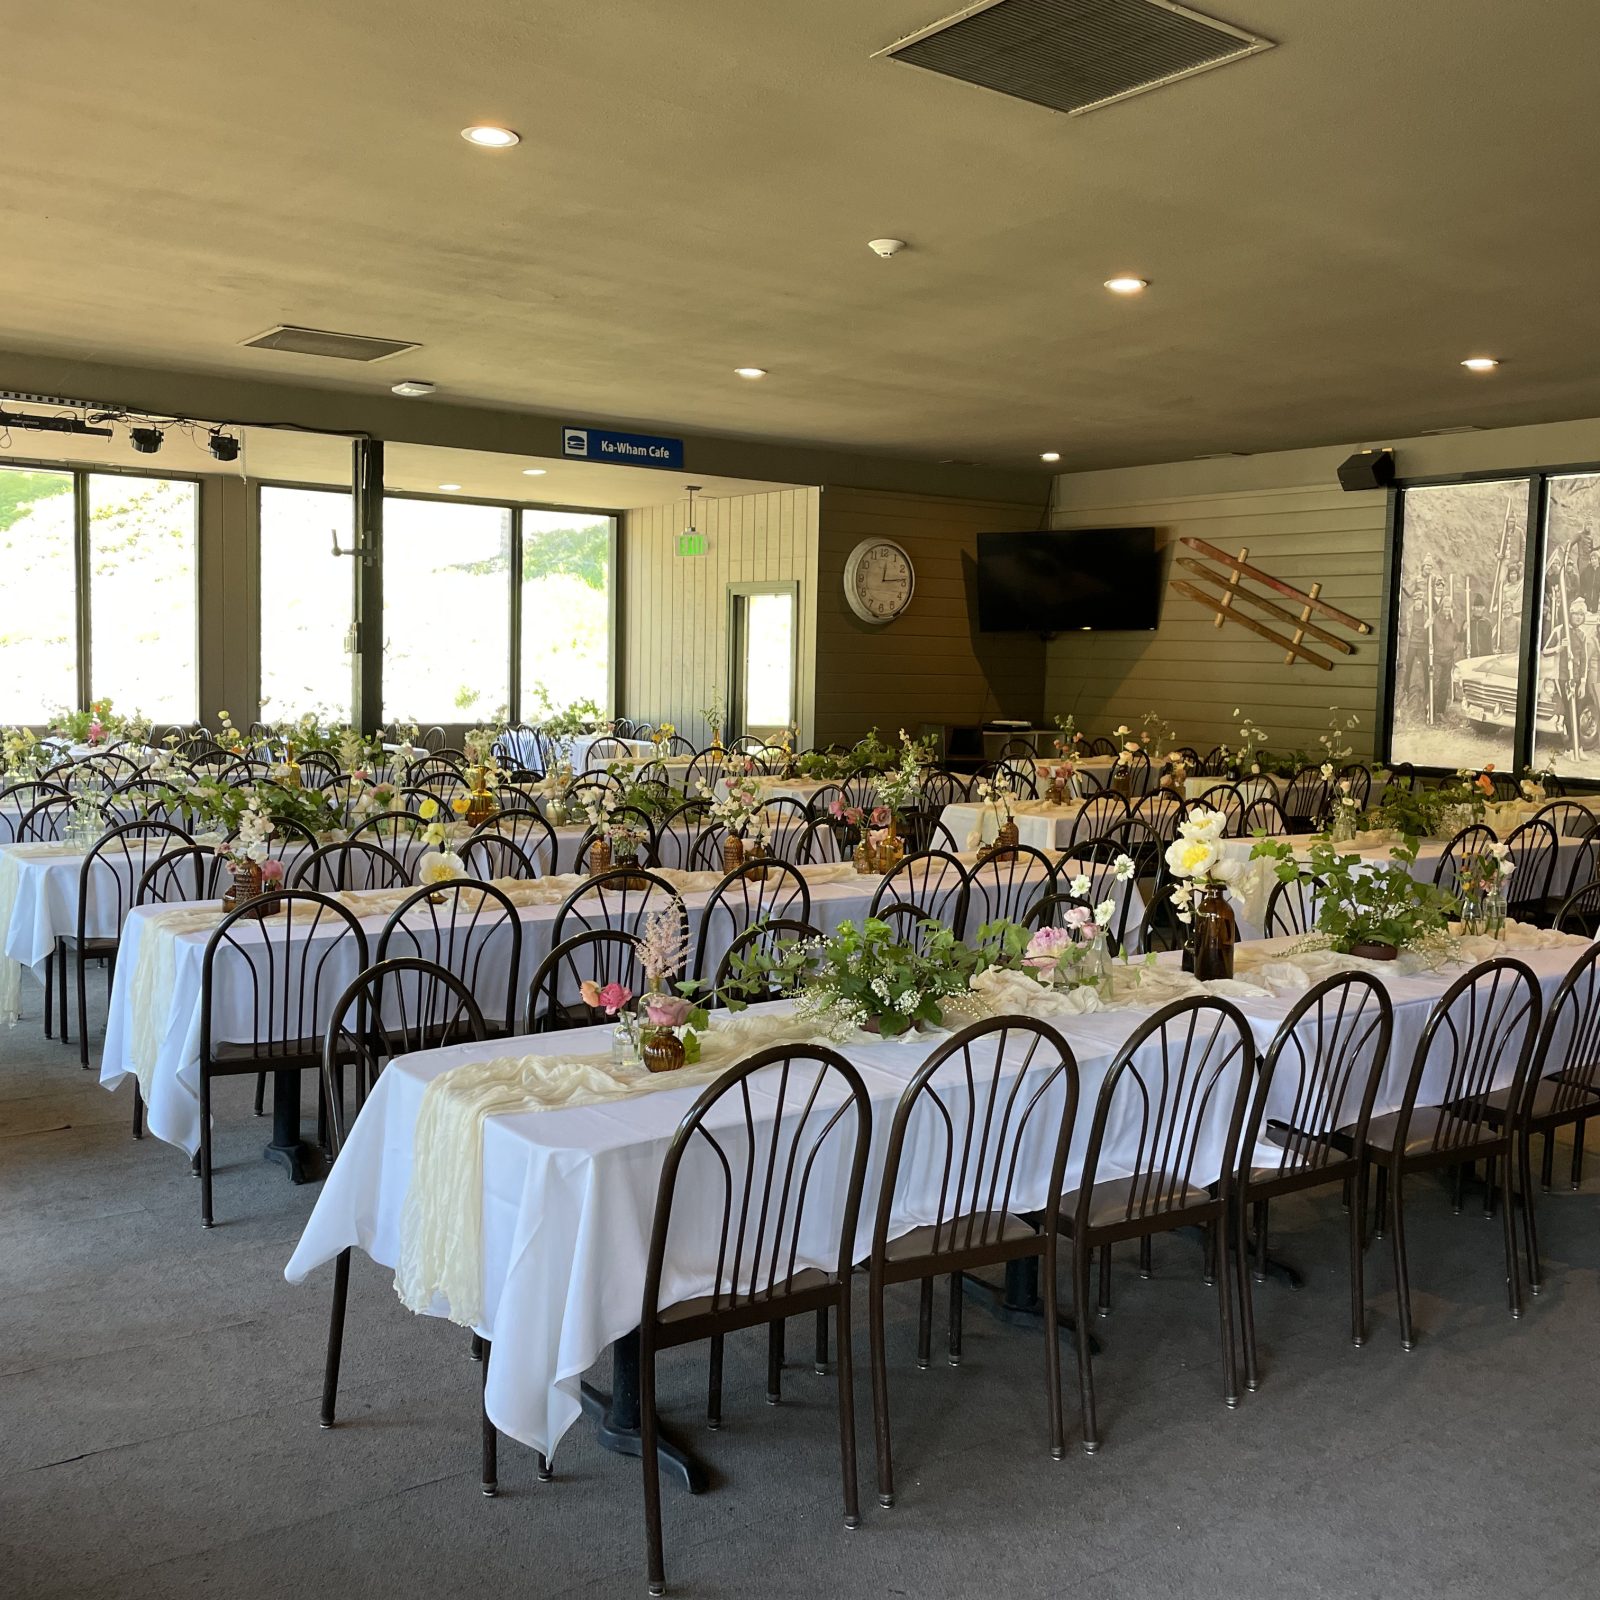 Tables set with white table cloths and flowers for a weeding reception inside the lodge